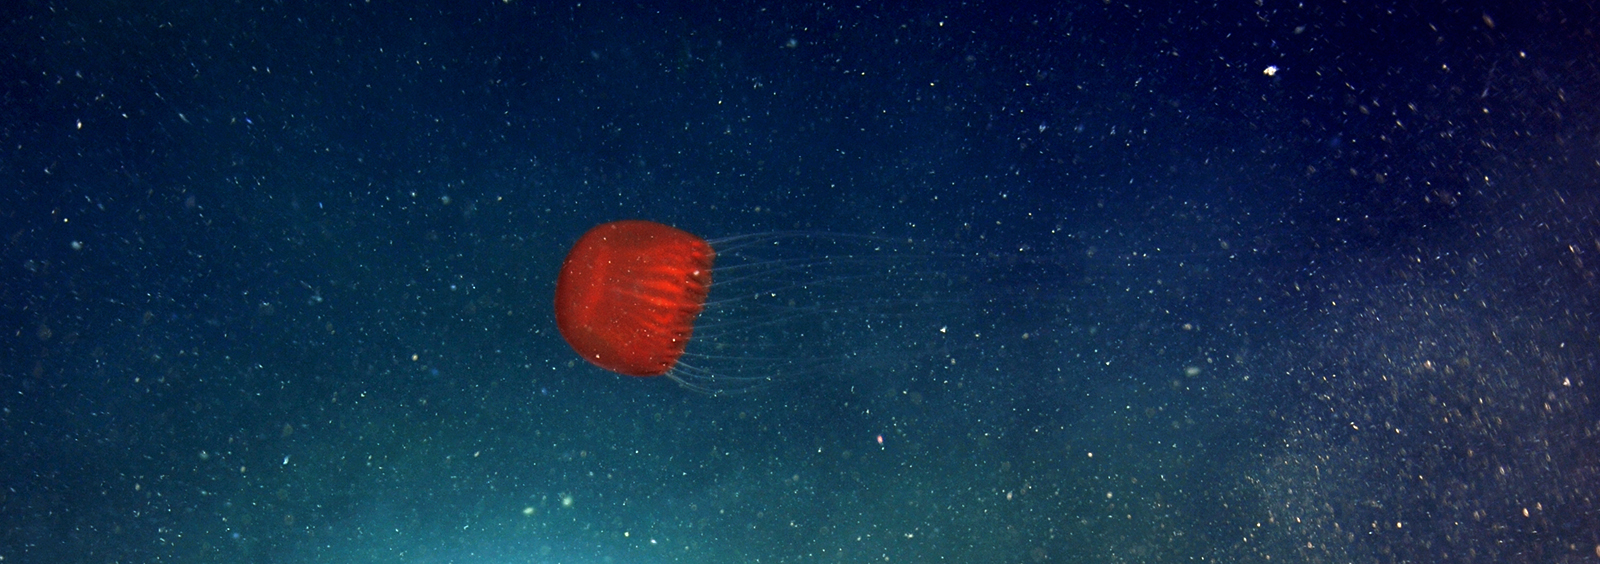 Jellyfish at depth 892m in Barkley Canyon Pacific Coast near Vancouver Island credit Ocean Networks Canada